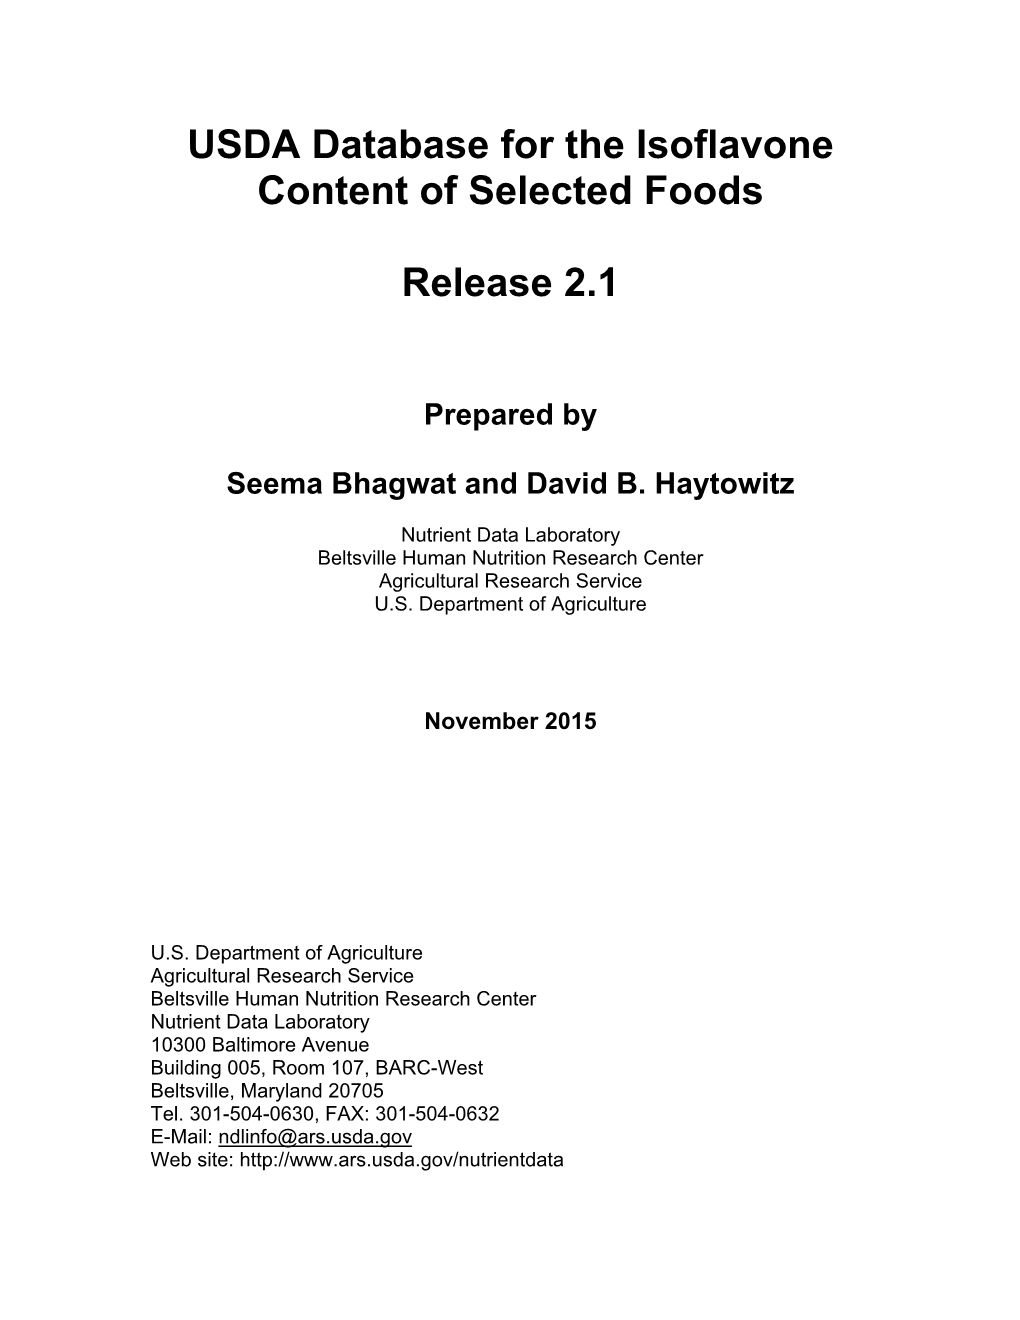 USDA Database for the Isoflavone Content of Selected Foods